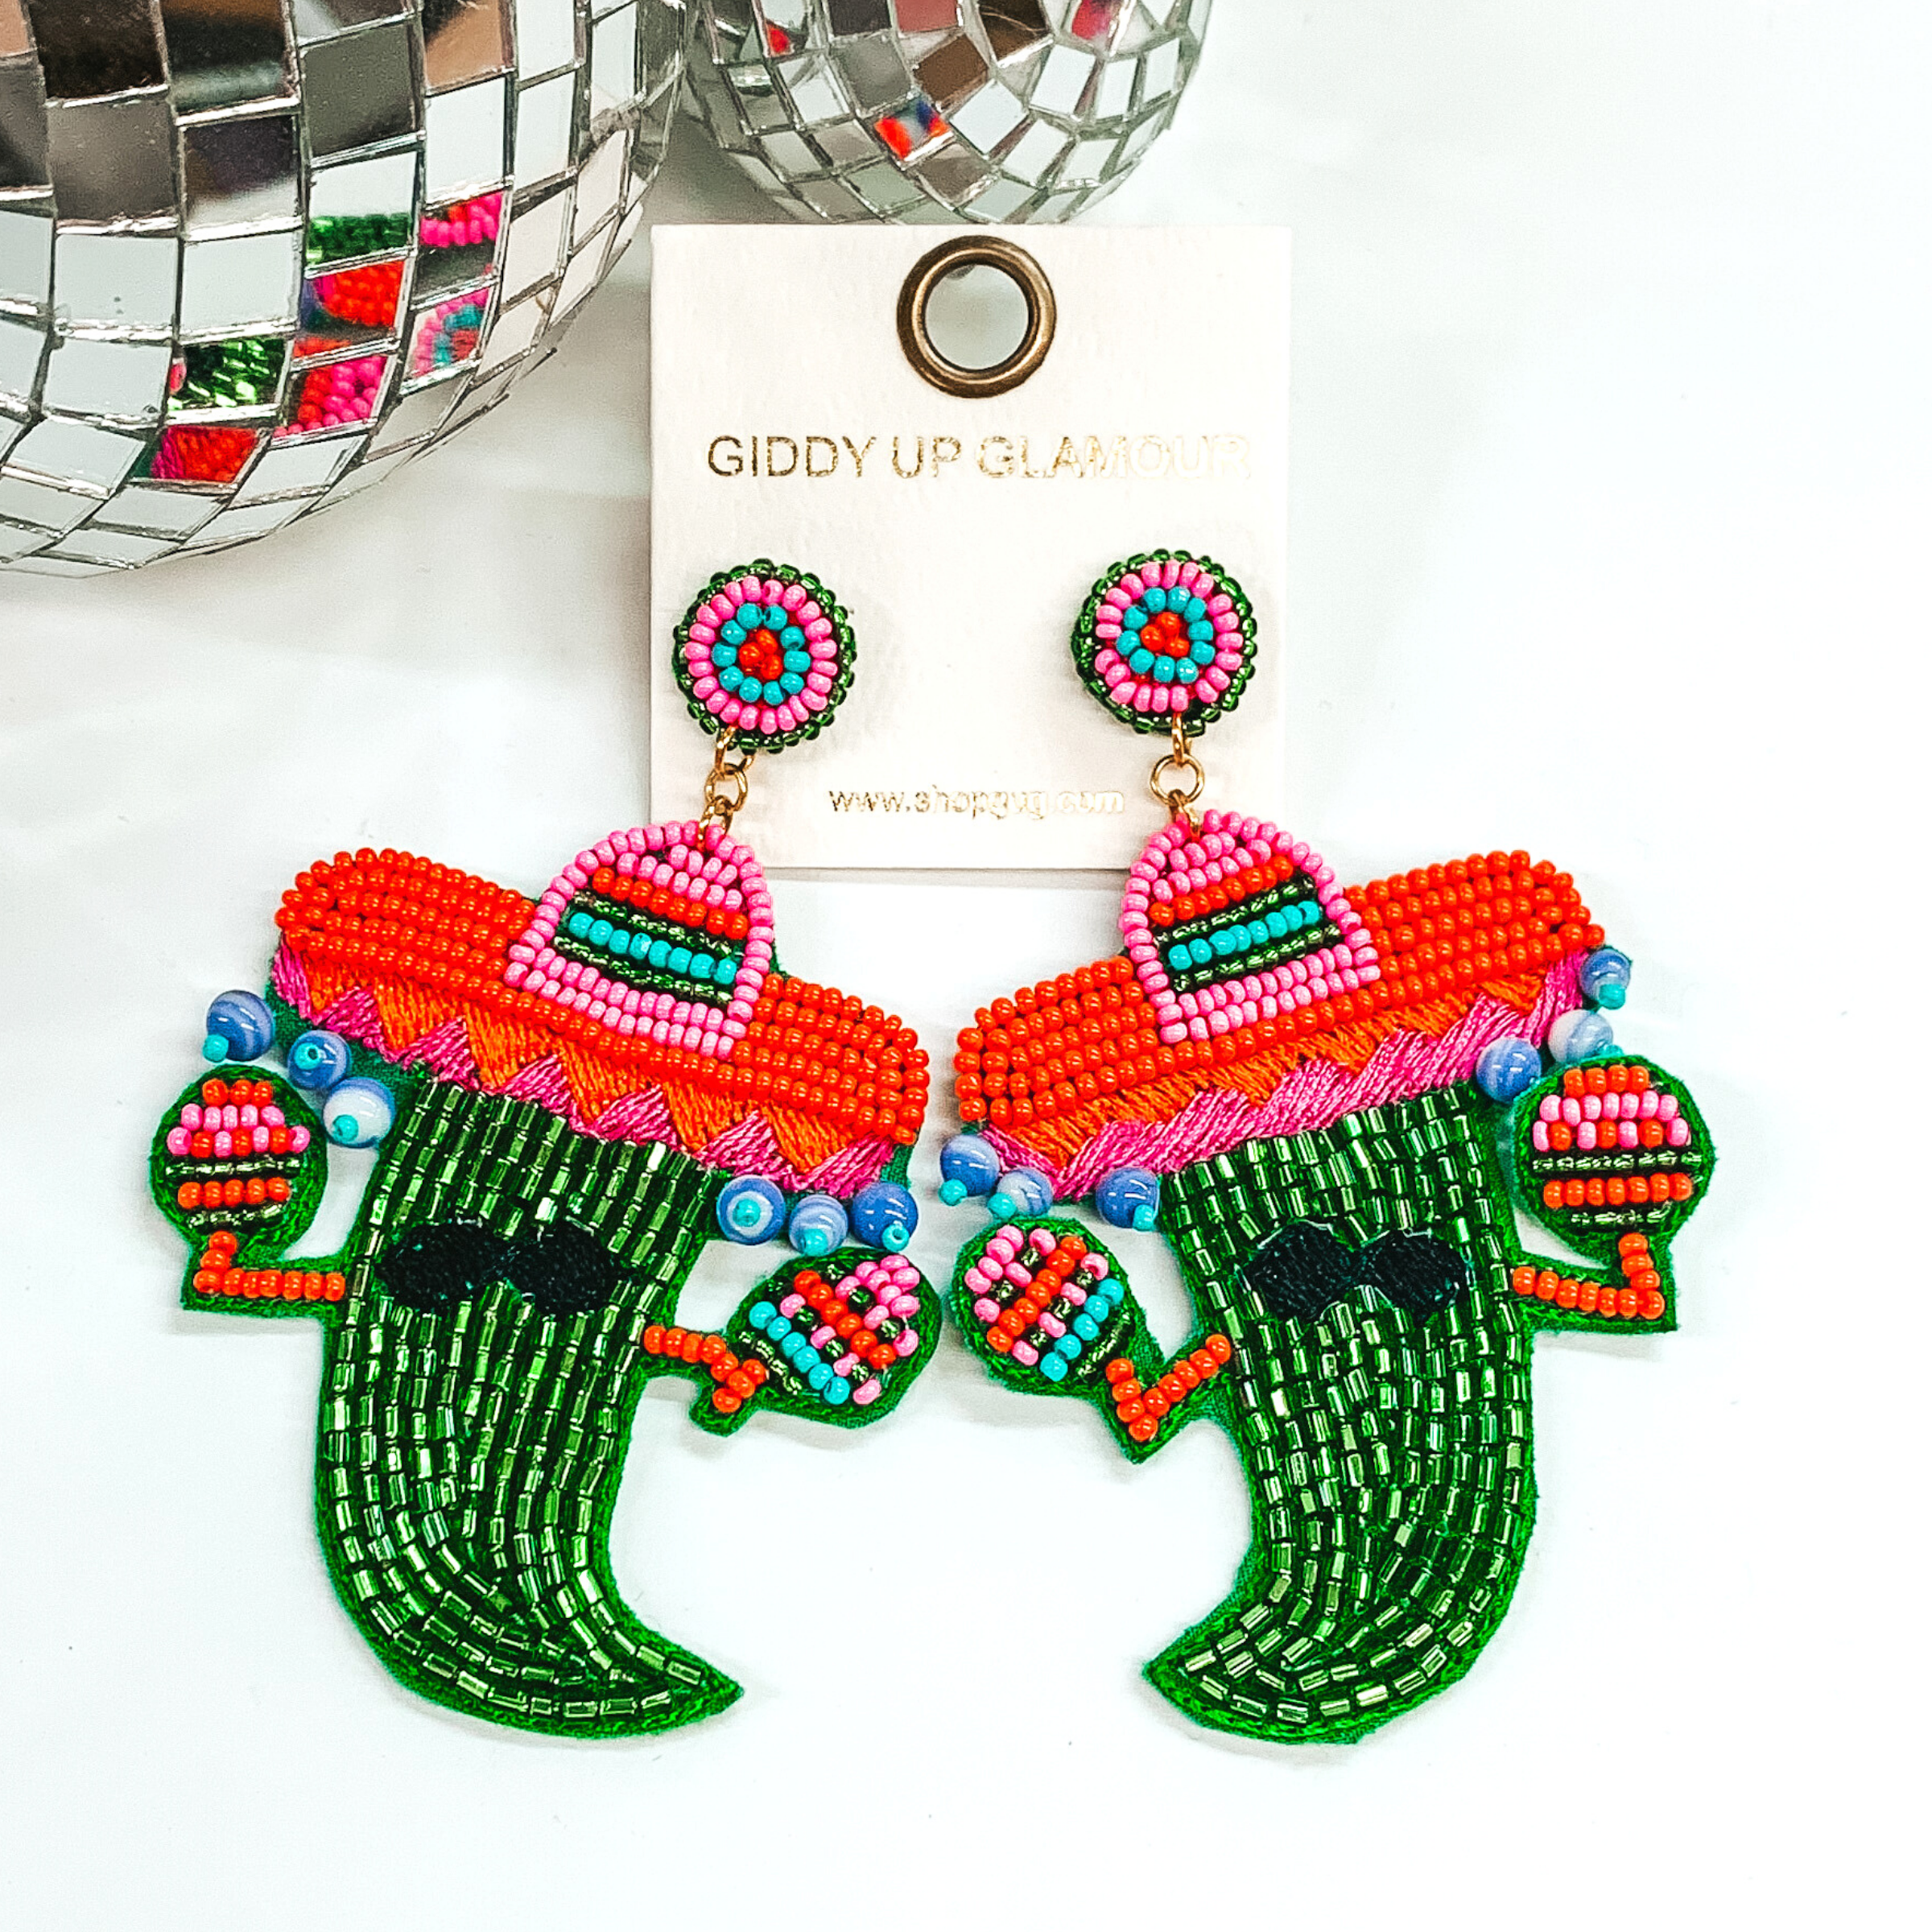 Green chili pepper beaded earrings. This pepper has arms holding colorful maracas, has a black stitched mustache, and a colorful sombrero with beaded tassels. These earrings are pictured on a white background with disco balls in the top left corner. 